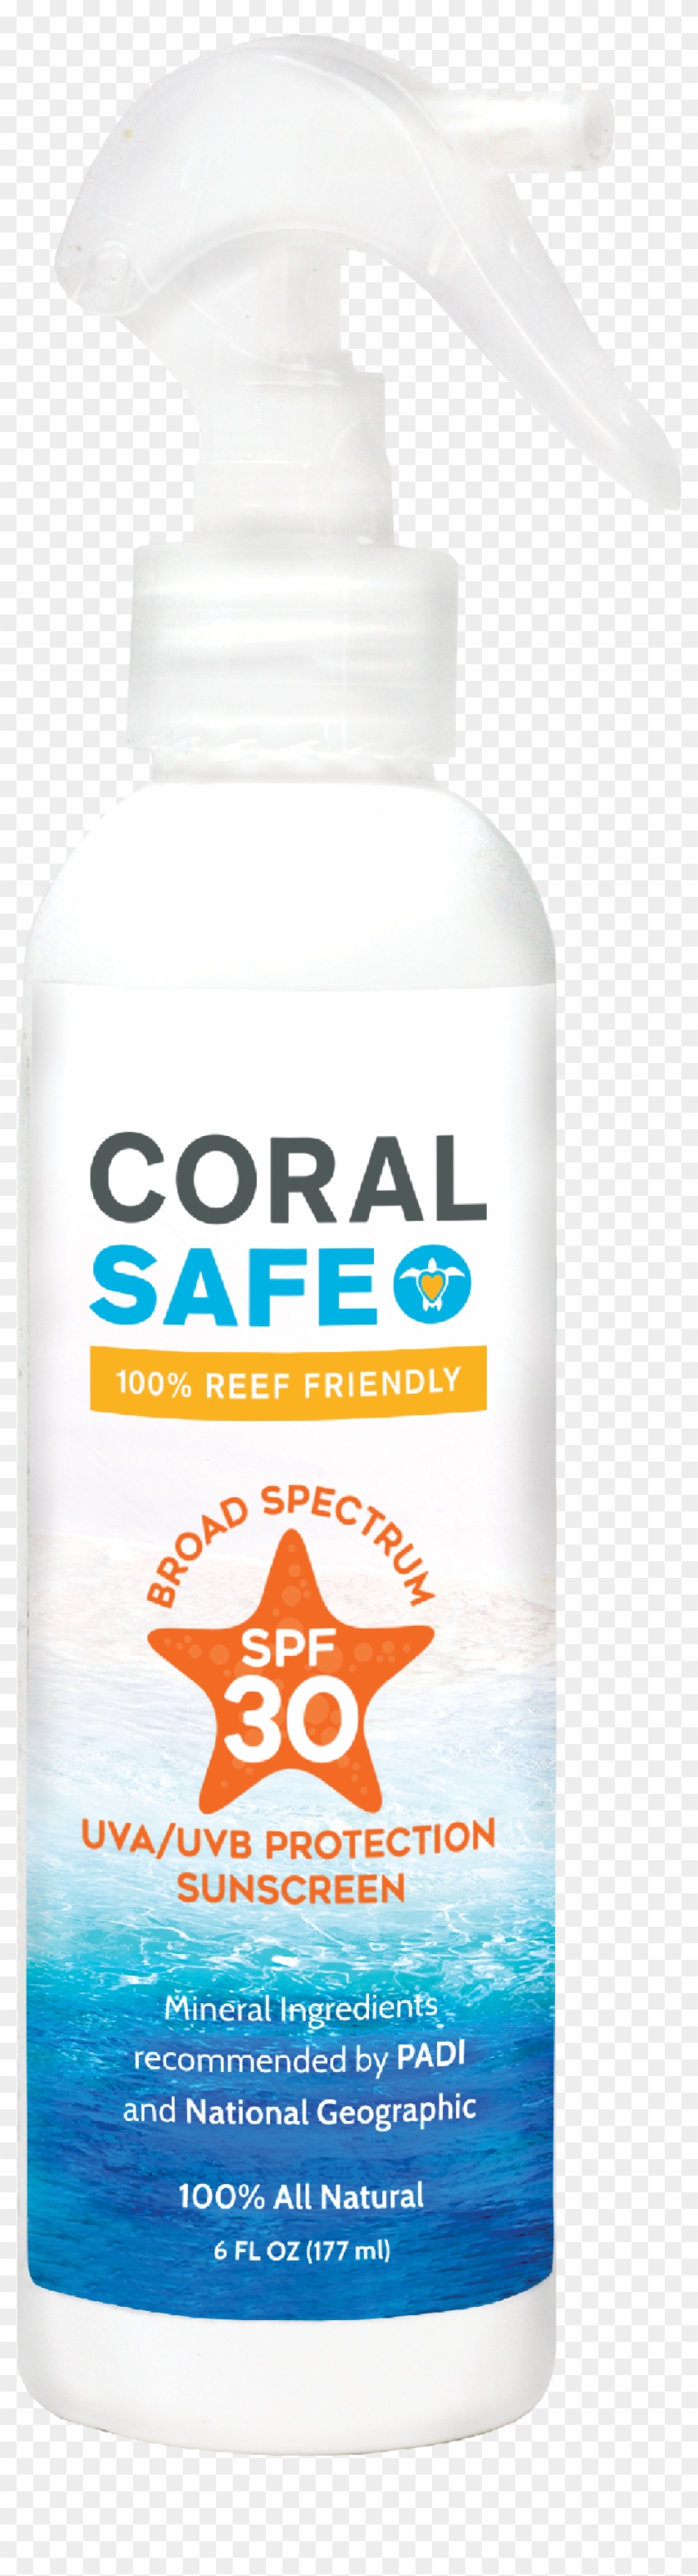 Coral Safe Spf 30 Spray Sunscreen Lotion - Coral Safe Spf 30 Spray Sunscreen Lotion #826339